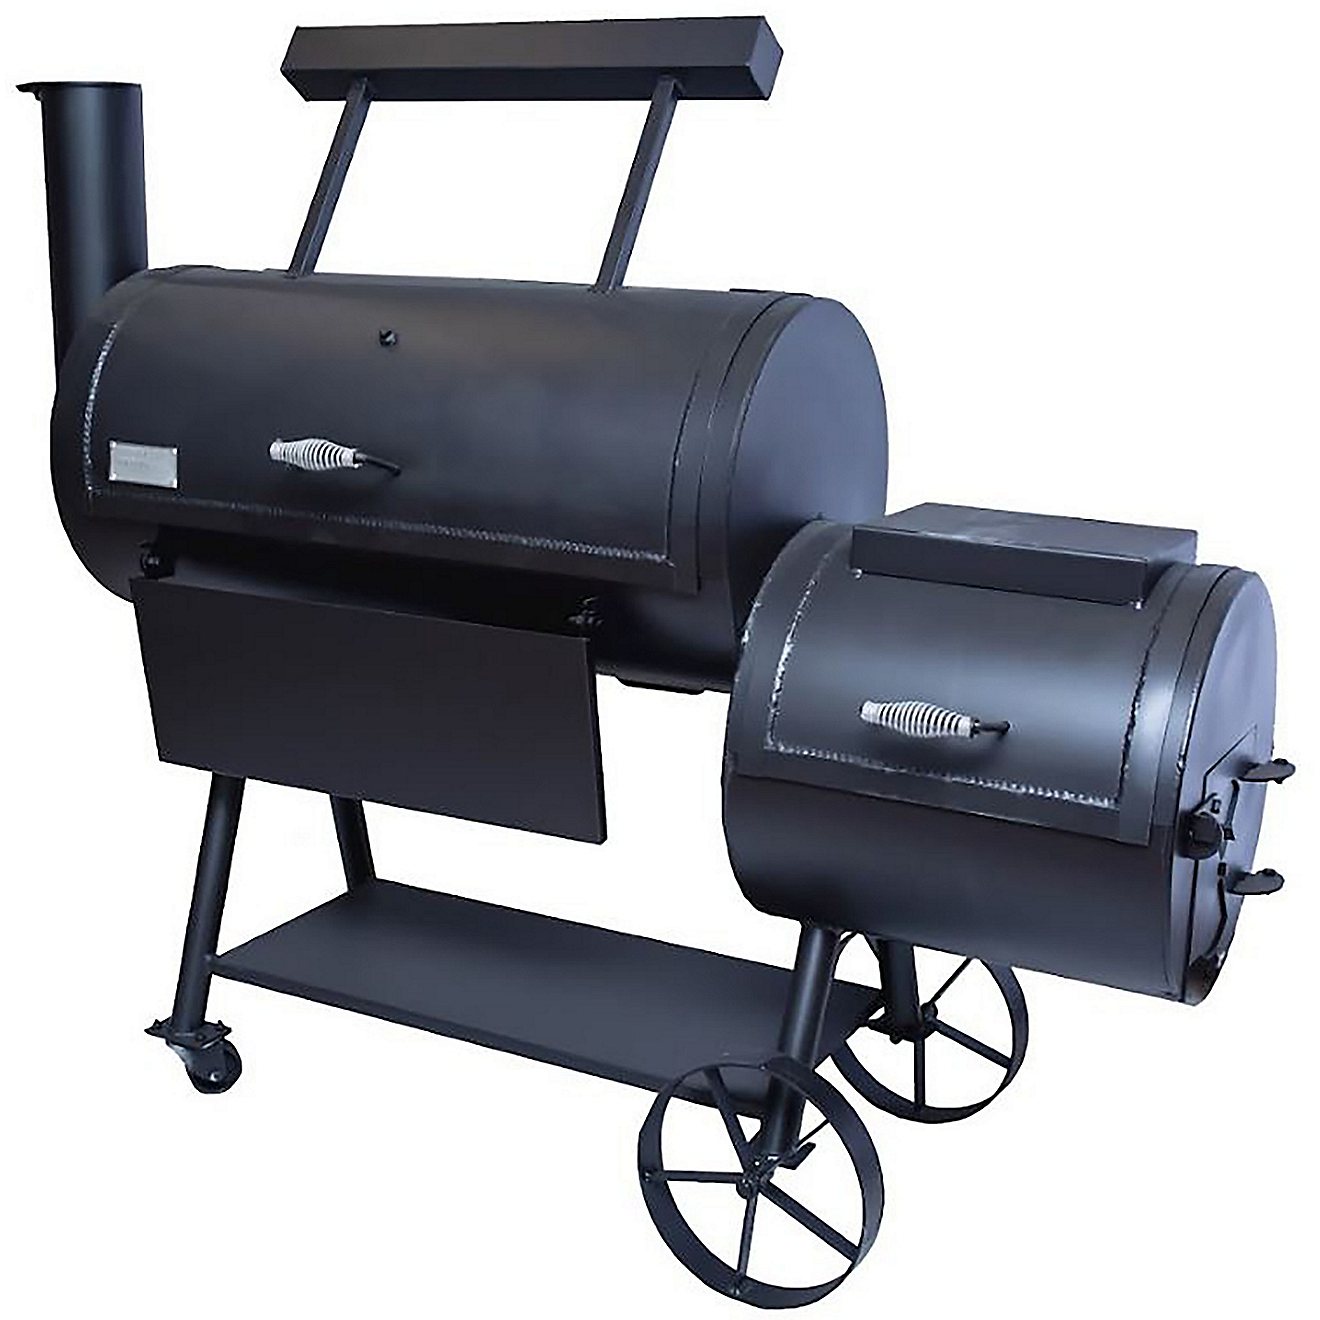 Old Country Brazos DLX Charcoal Smoker                                                                                           - view number 3